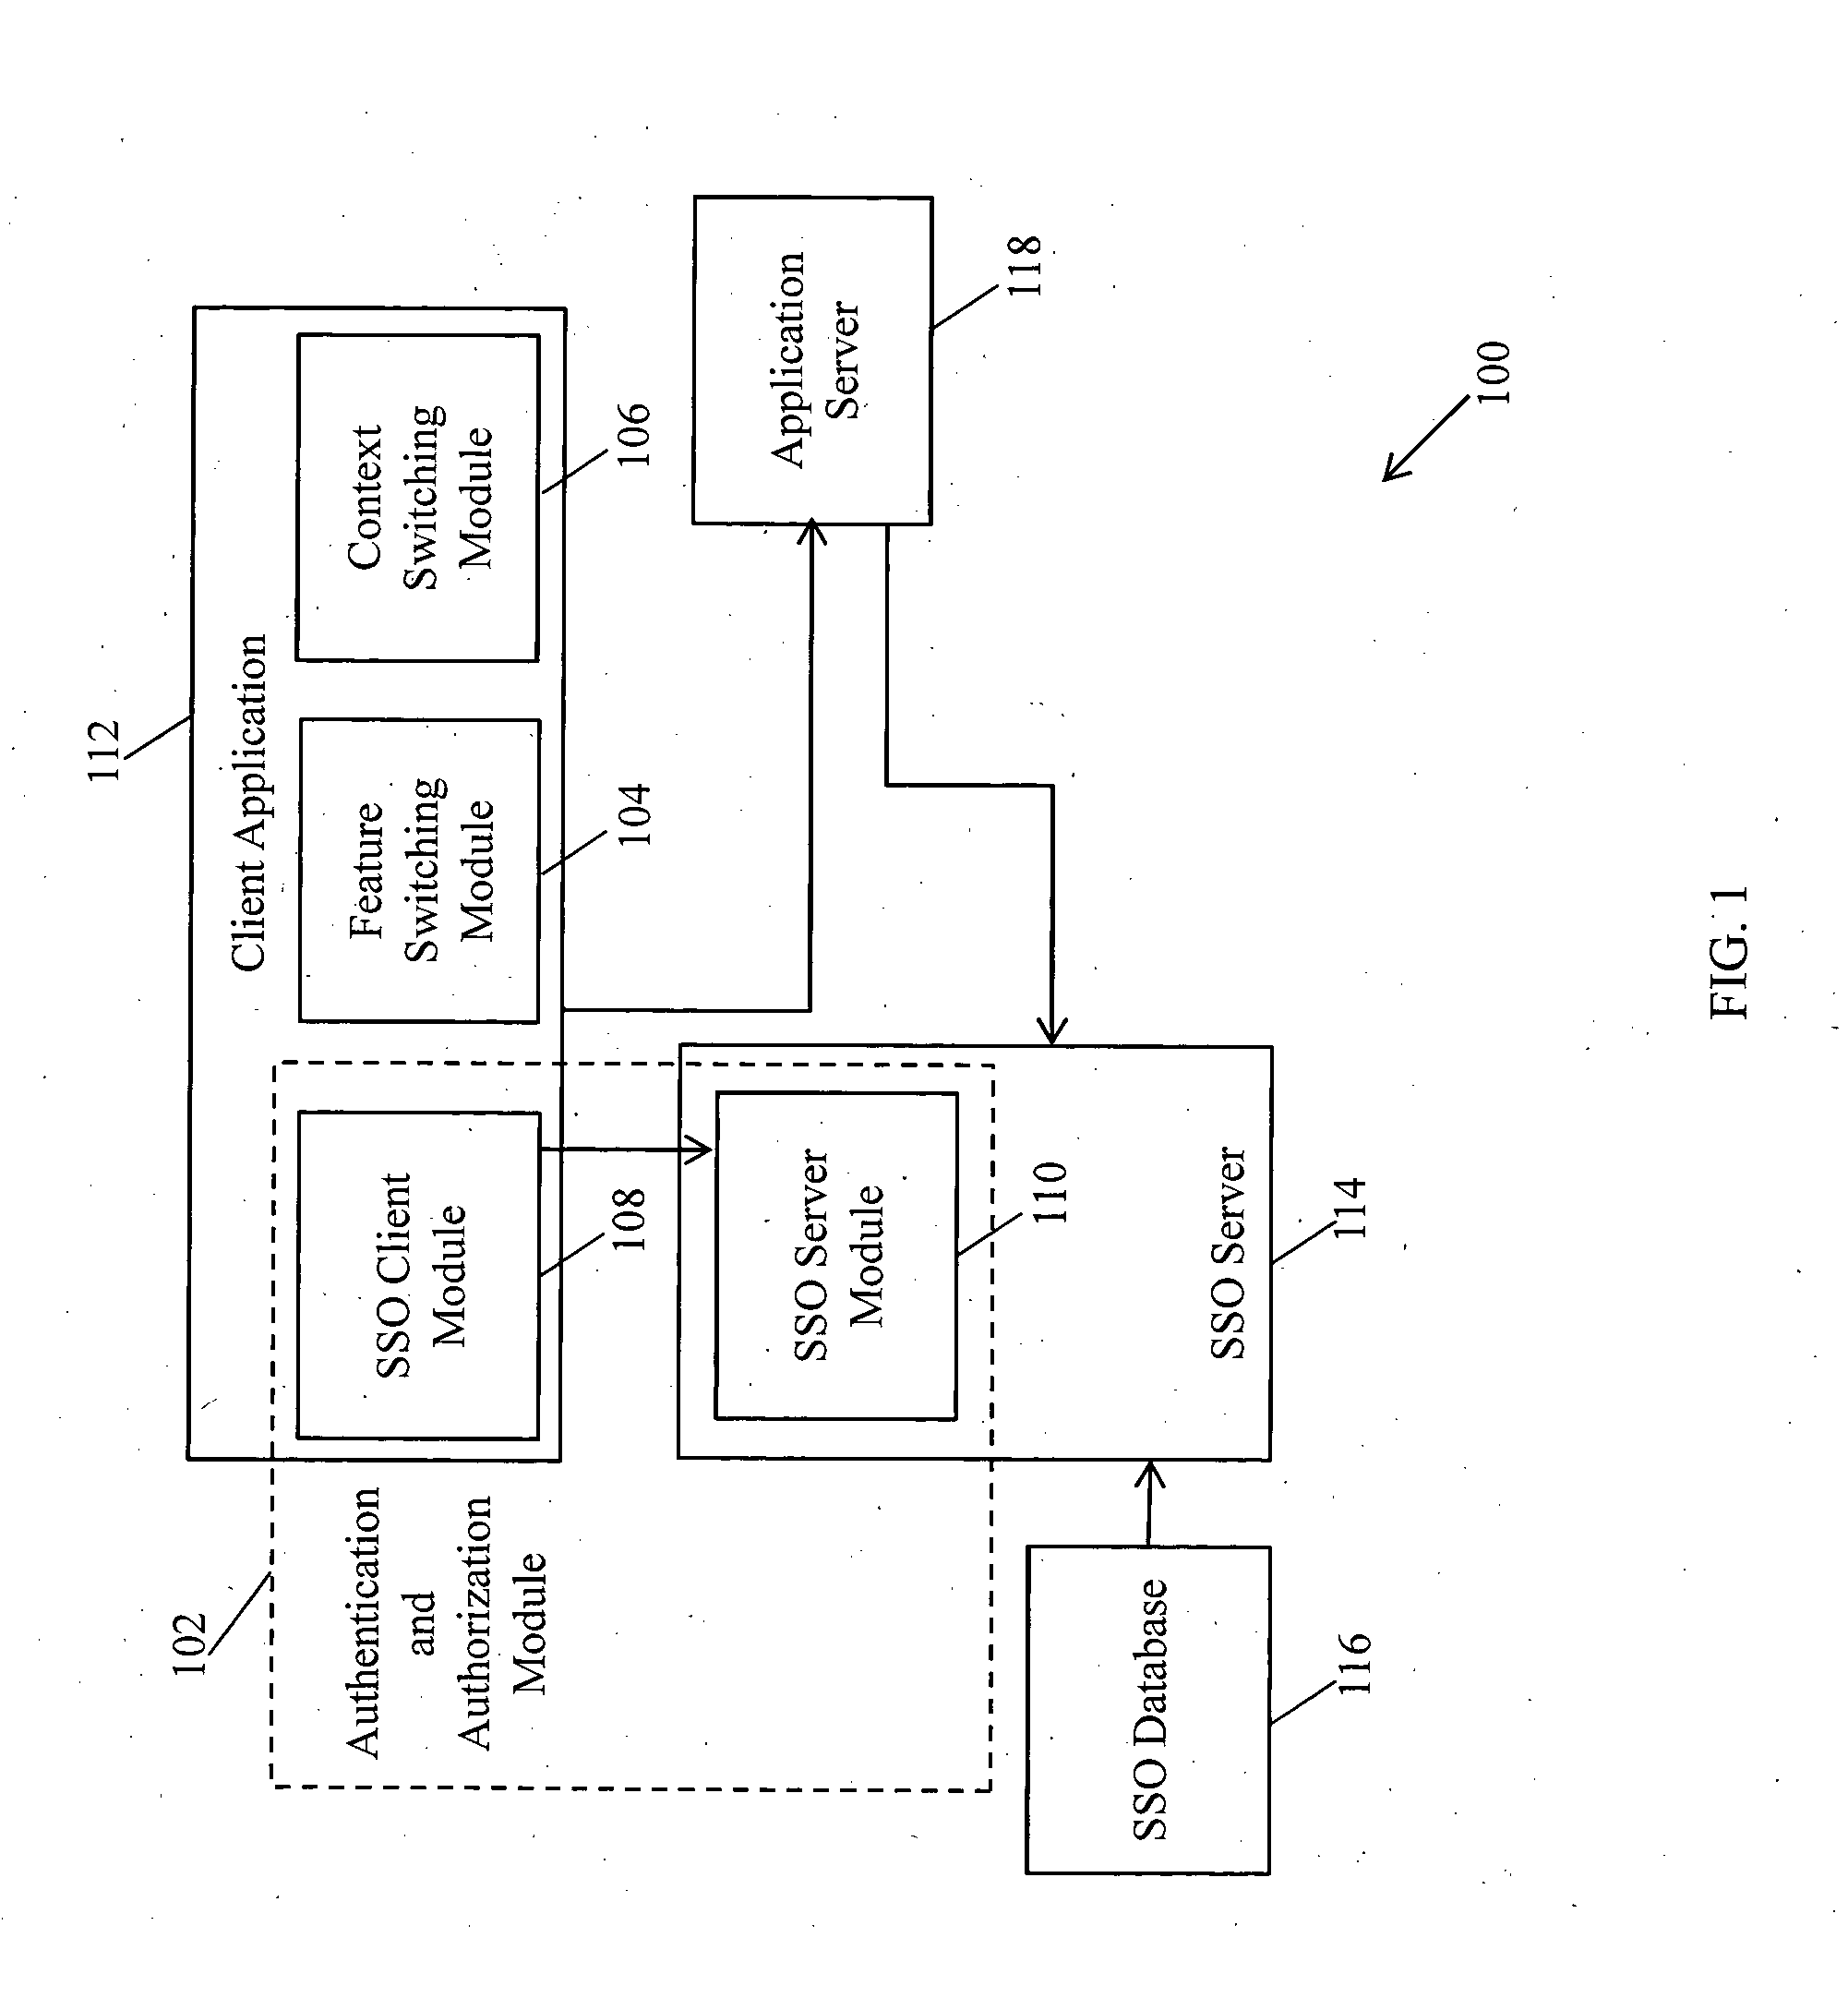 System and method for accessing integrated applications in a single sign-on enabled enterprise solution